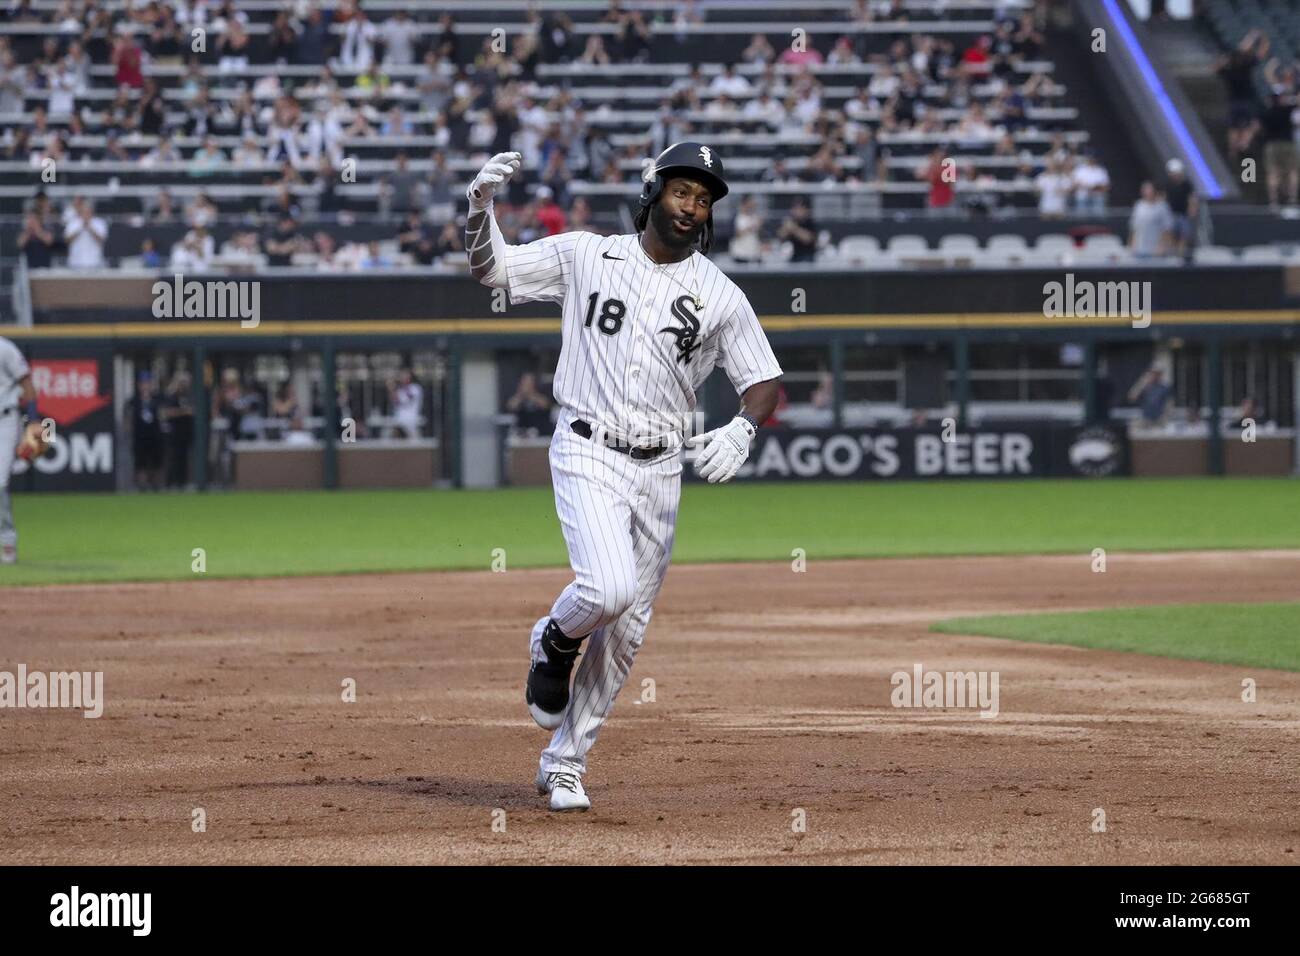 The Chicago White Sox Brian Goodwin celebrates after hitting a solo home run during the second inning against the Minnesota Twins at Guaranteed Rate Field on Wednesday, June 30, 2021 in Chicago.